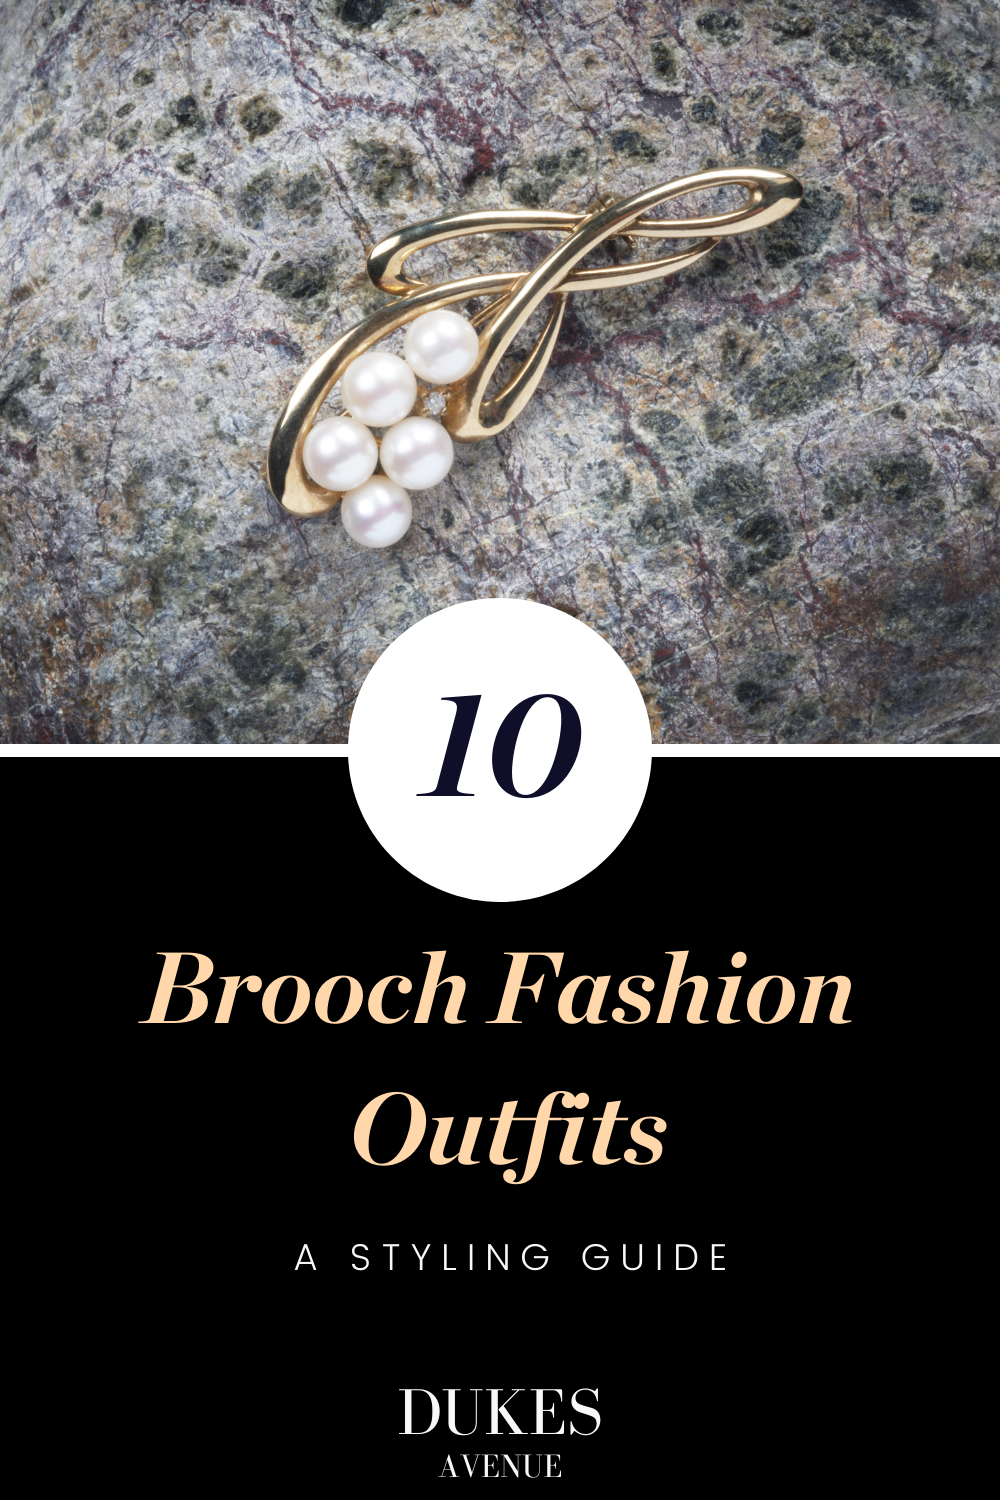 A gold brooch with pearls on a grey surface with text overlay "10 brooch fashion outfits - a styling guide"